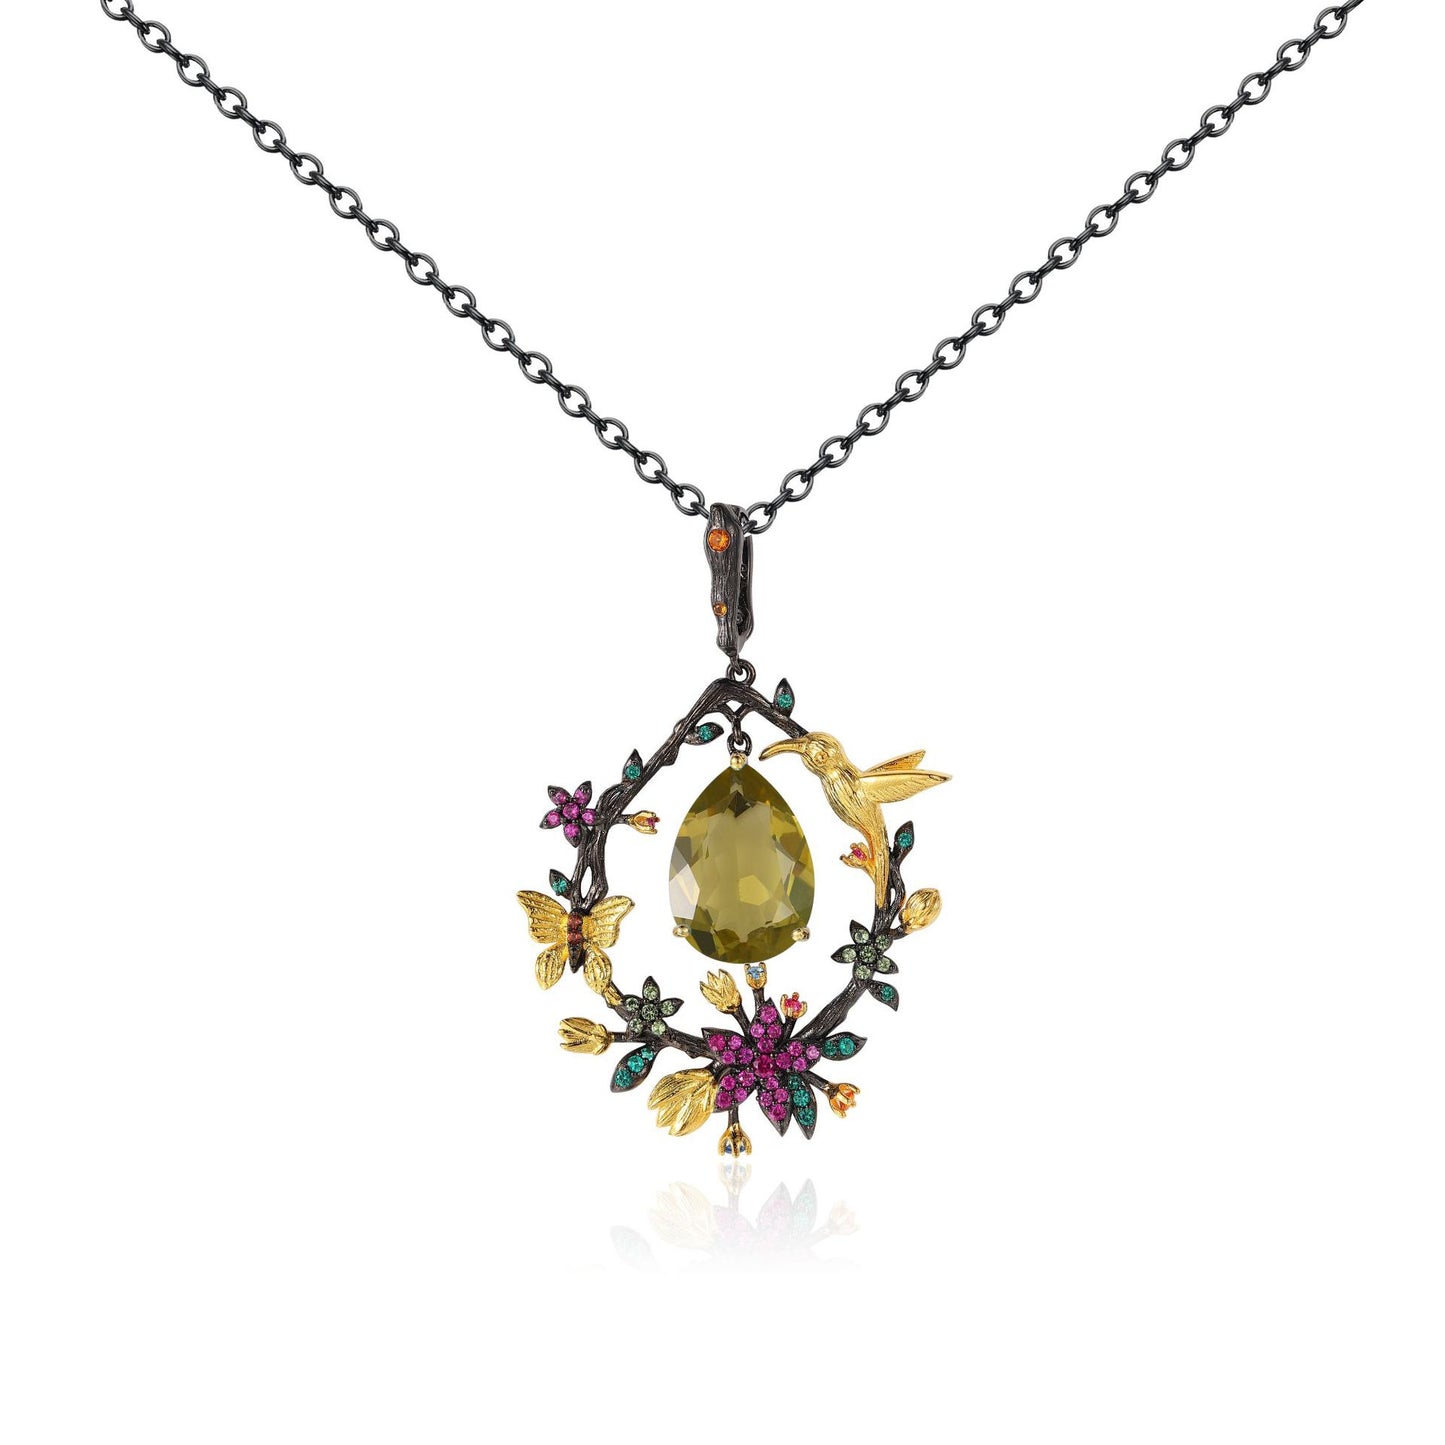 Natural Colorful Gemstone Spring on The Branch with Bird Pendant Silver Necklace for Women